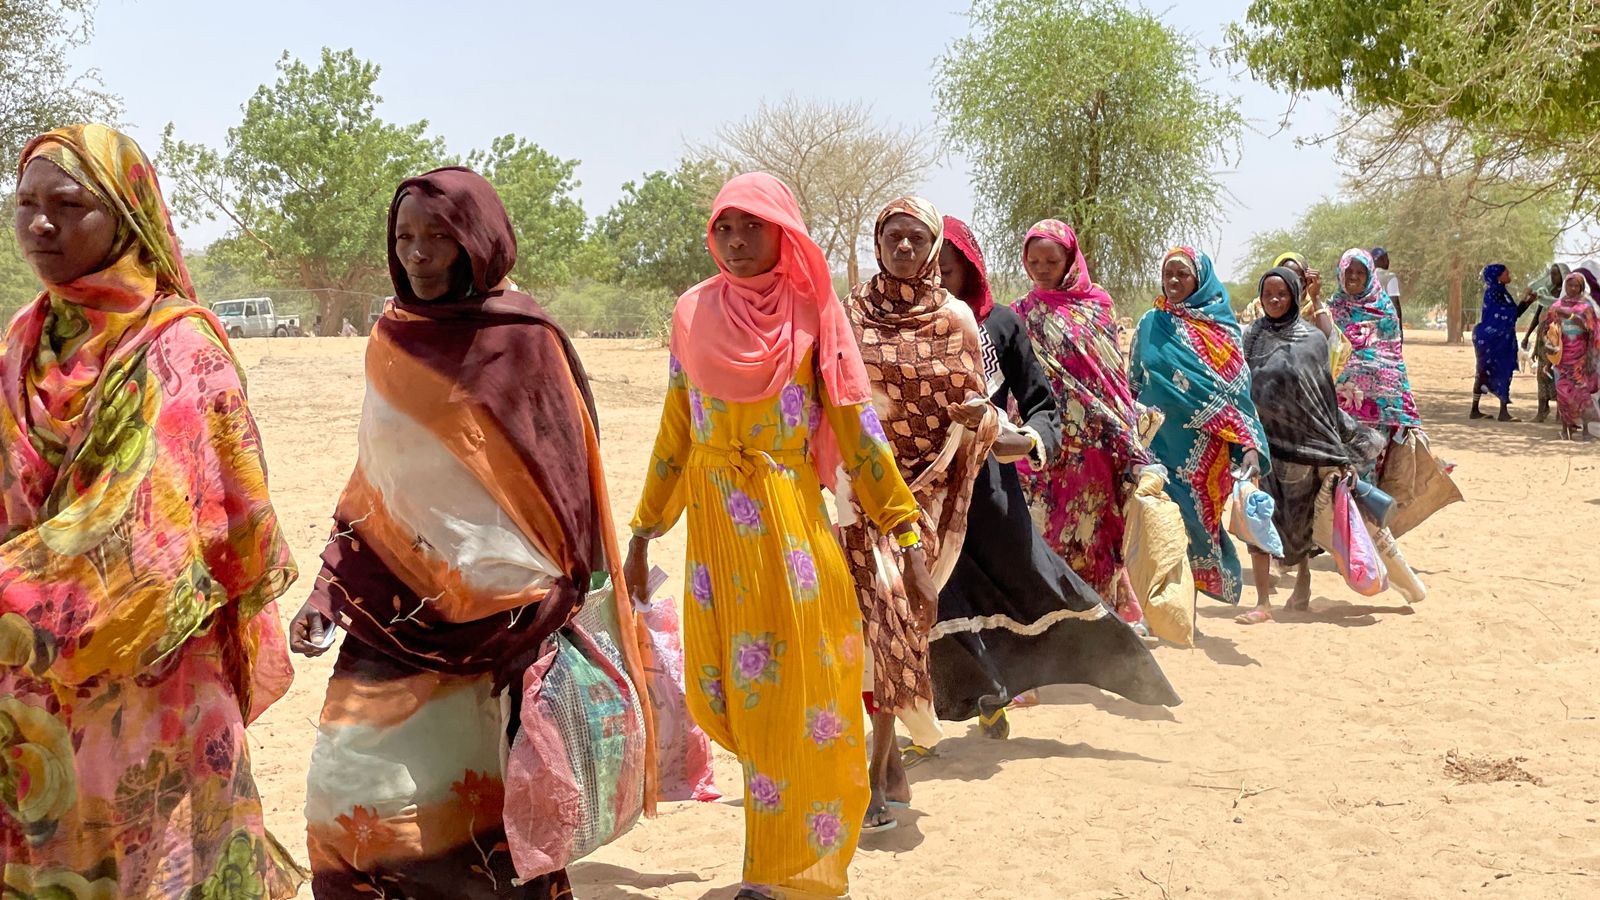 'They set us on fire and took everything': The harrowing stories inside Chad's refugee camps as thousands flee Sudan